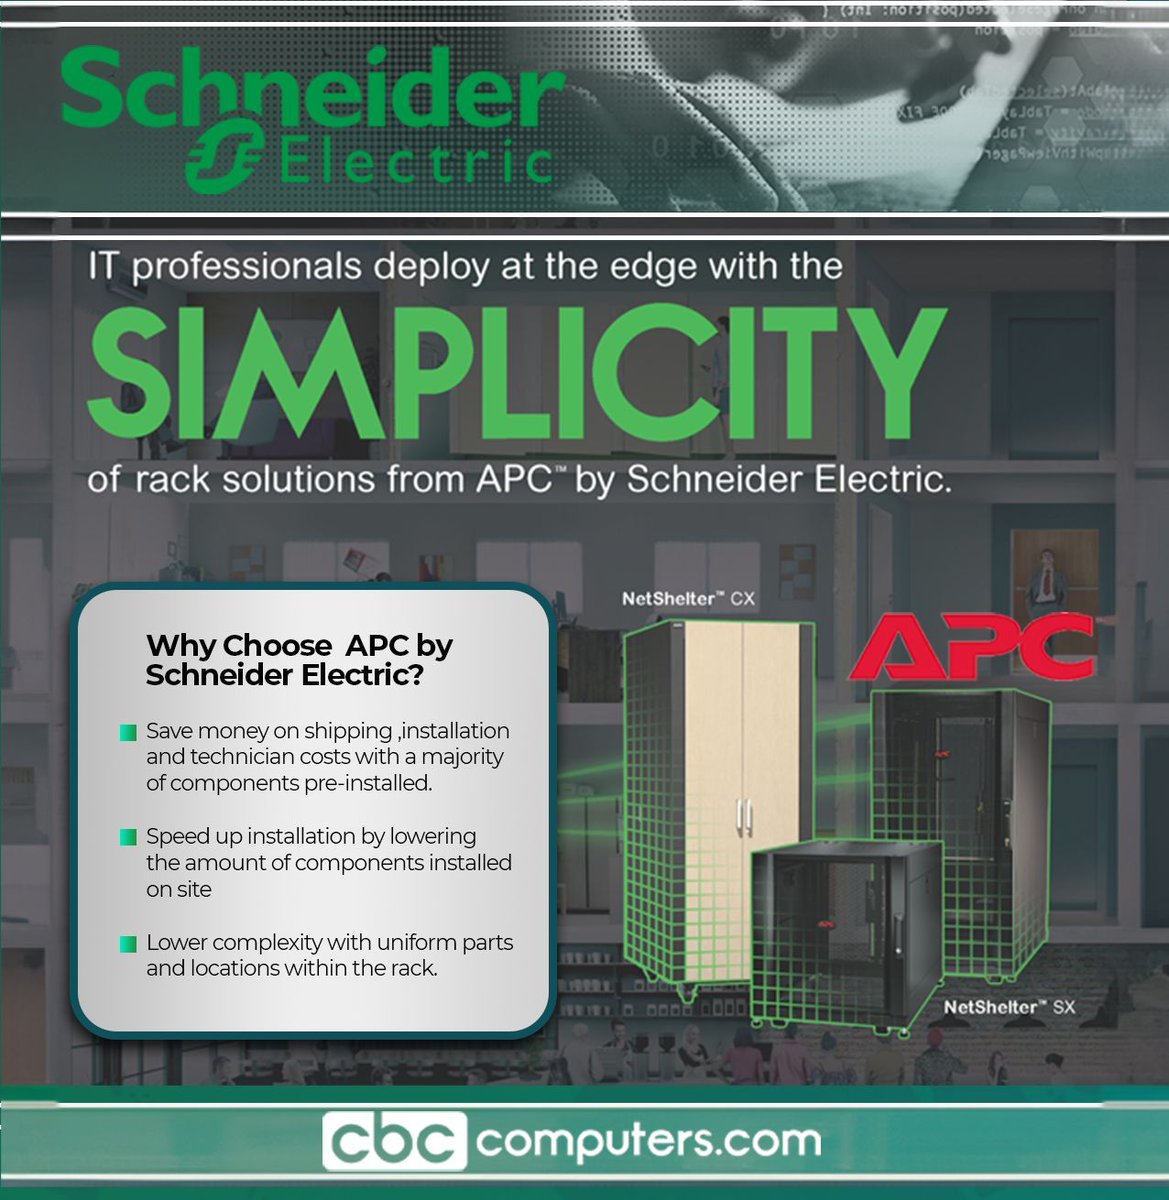 Empower education with APC by Schneider Electric! Their rack IT solutions ensure seamless connectivity, reliability, and efficiency for schools. 

# TechForSchools #APCInnovation #EdTechSolutions #RackITUpgrade #EducationTech #SmartSchools #InnovateWithAPC #PoweringEducation